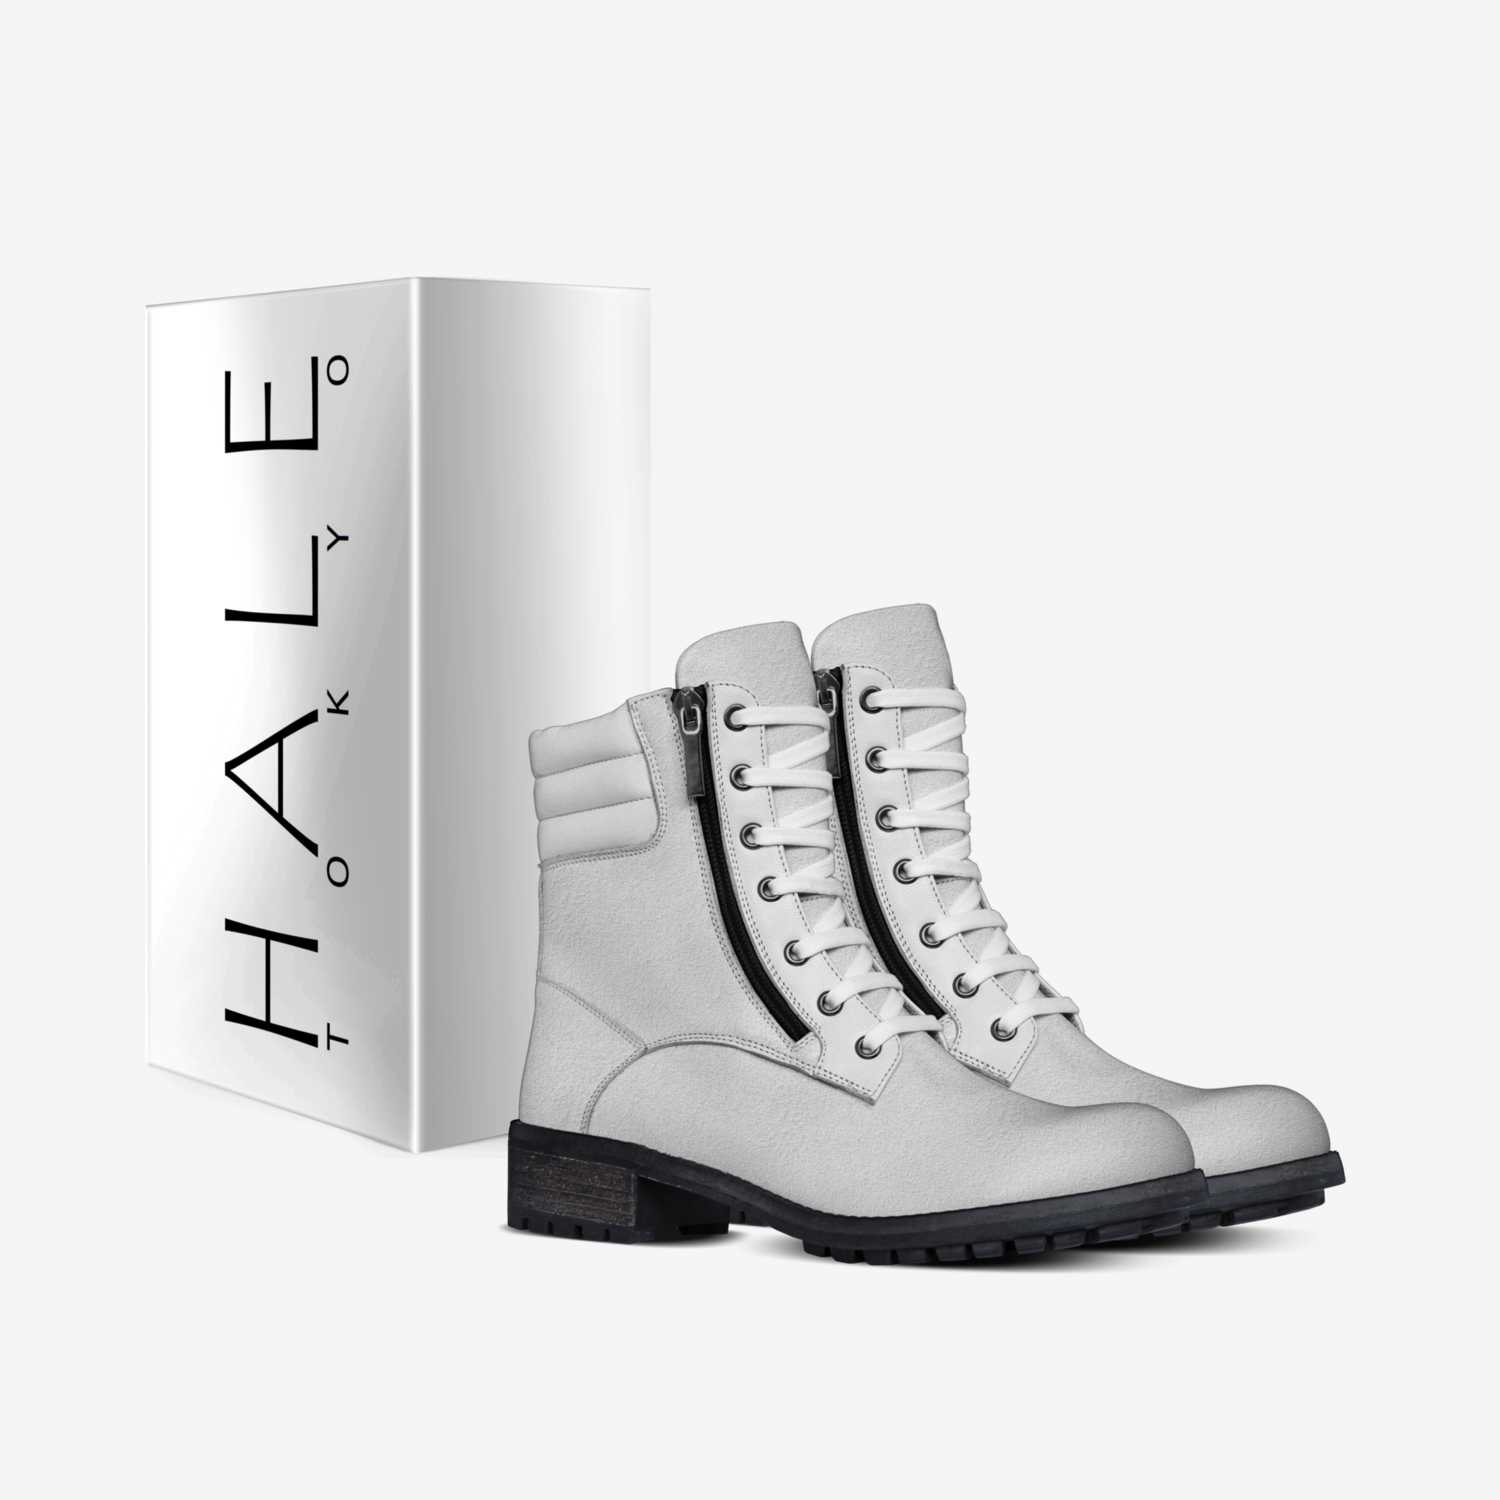 Hale tokyo custom made in Italy shoes by Sayaka Ono | Box view